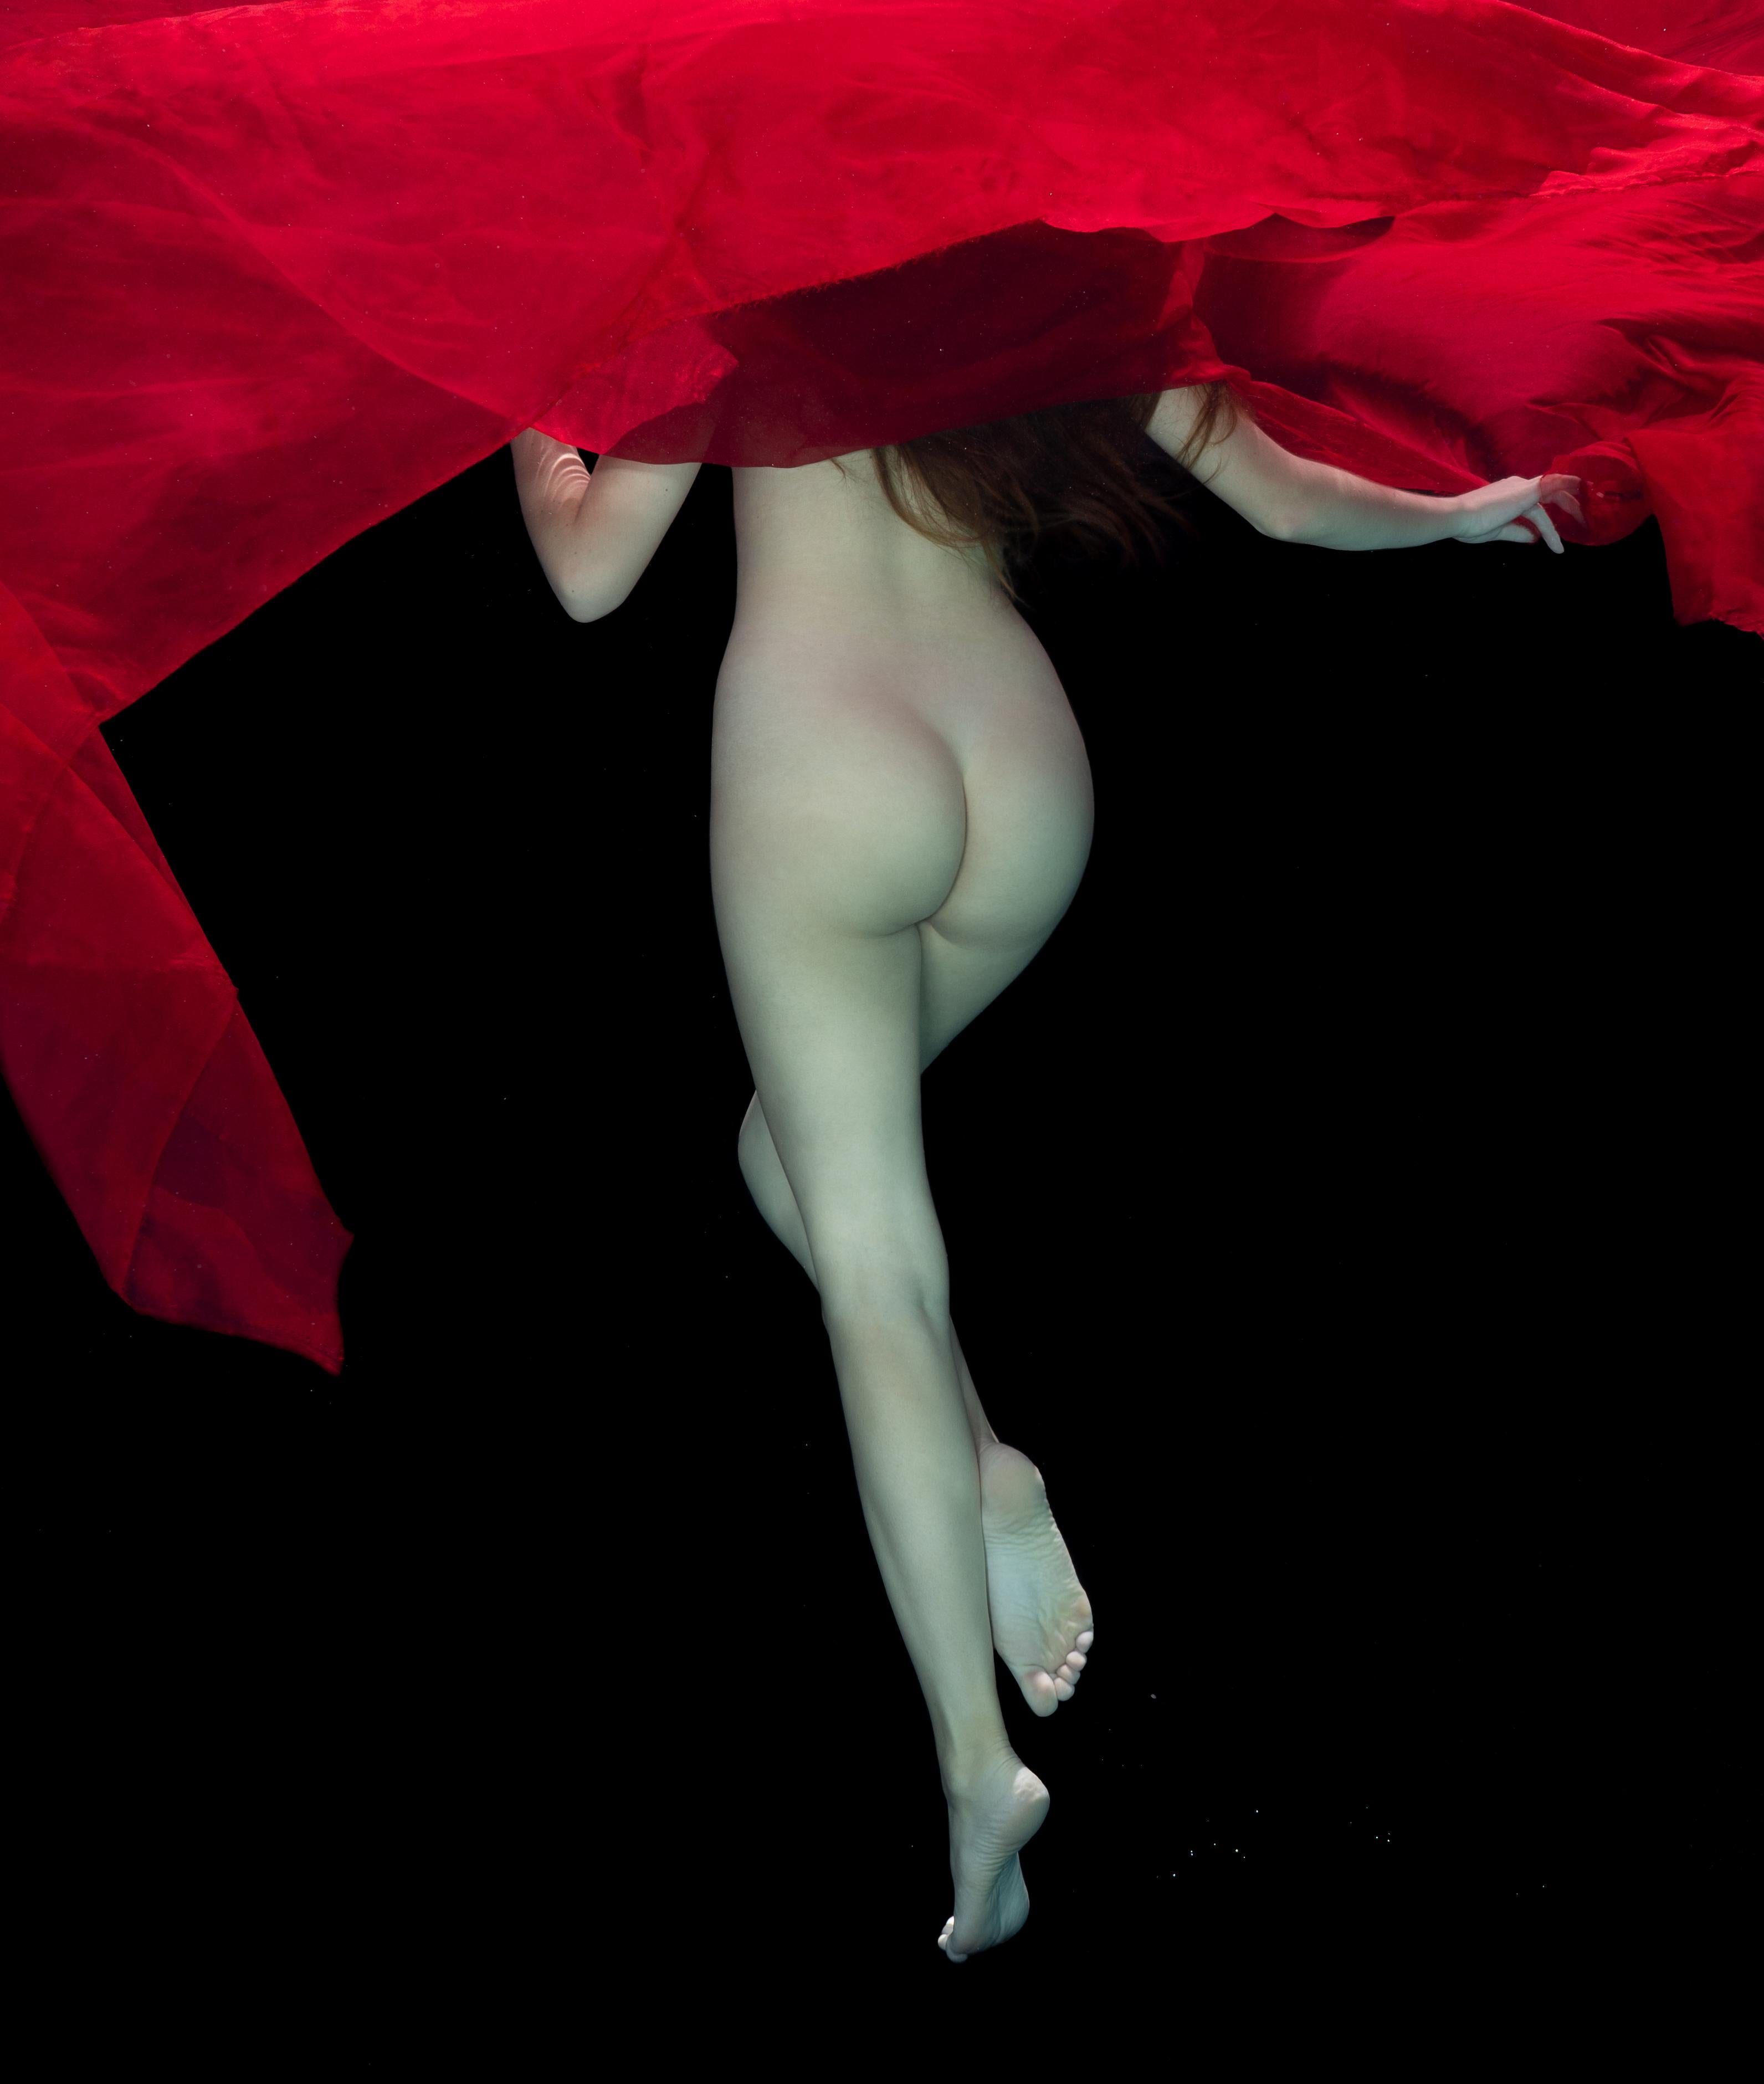 Hibiscus - underwater nude photograph - archival pigment print 35х53 - Photograph by Alex Sher